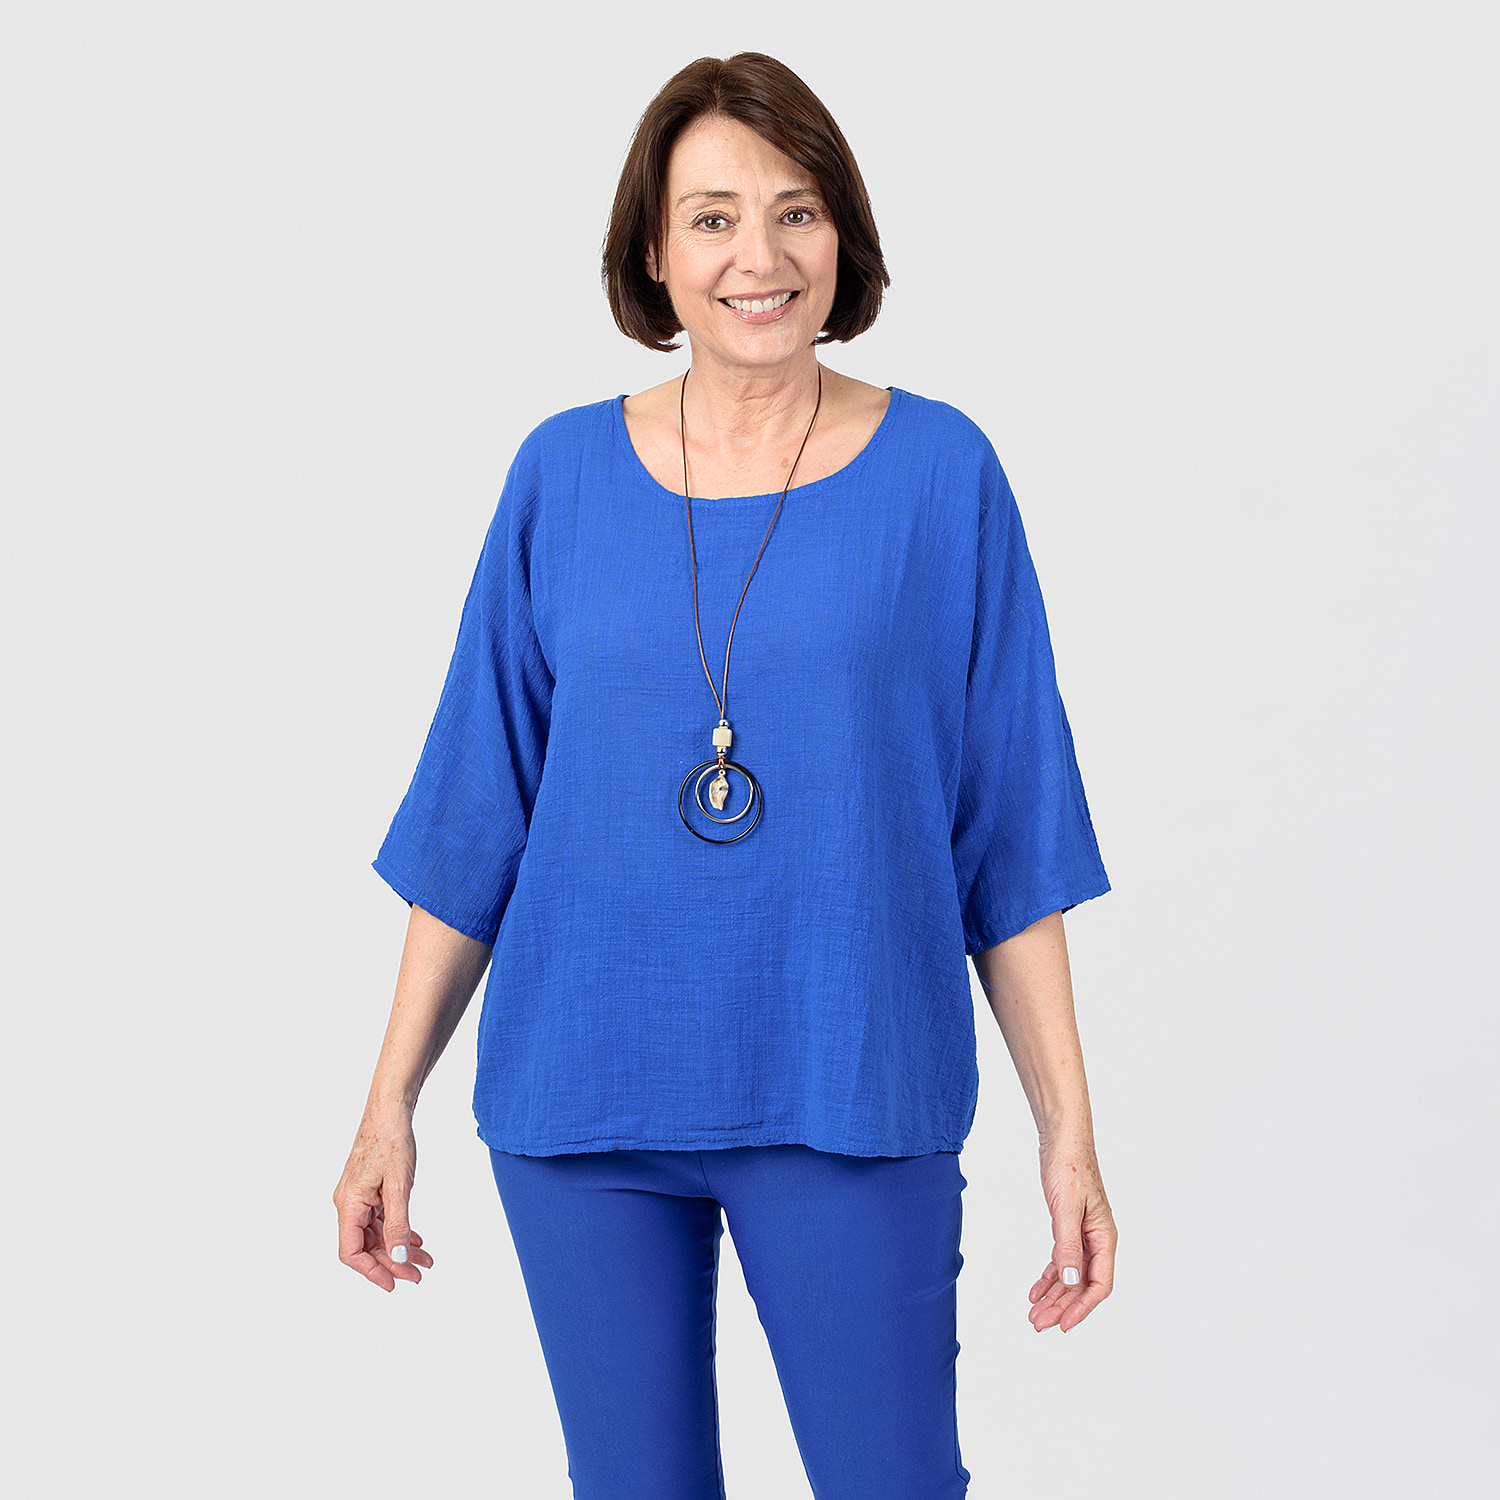 Mudflower 100% Cotton Top with Necklace (One Size,8-18) - Cobalt Blue